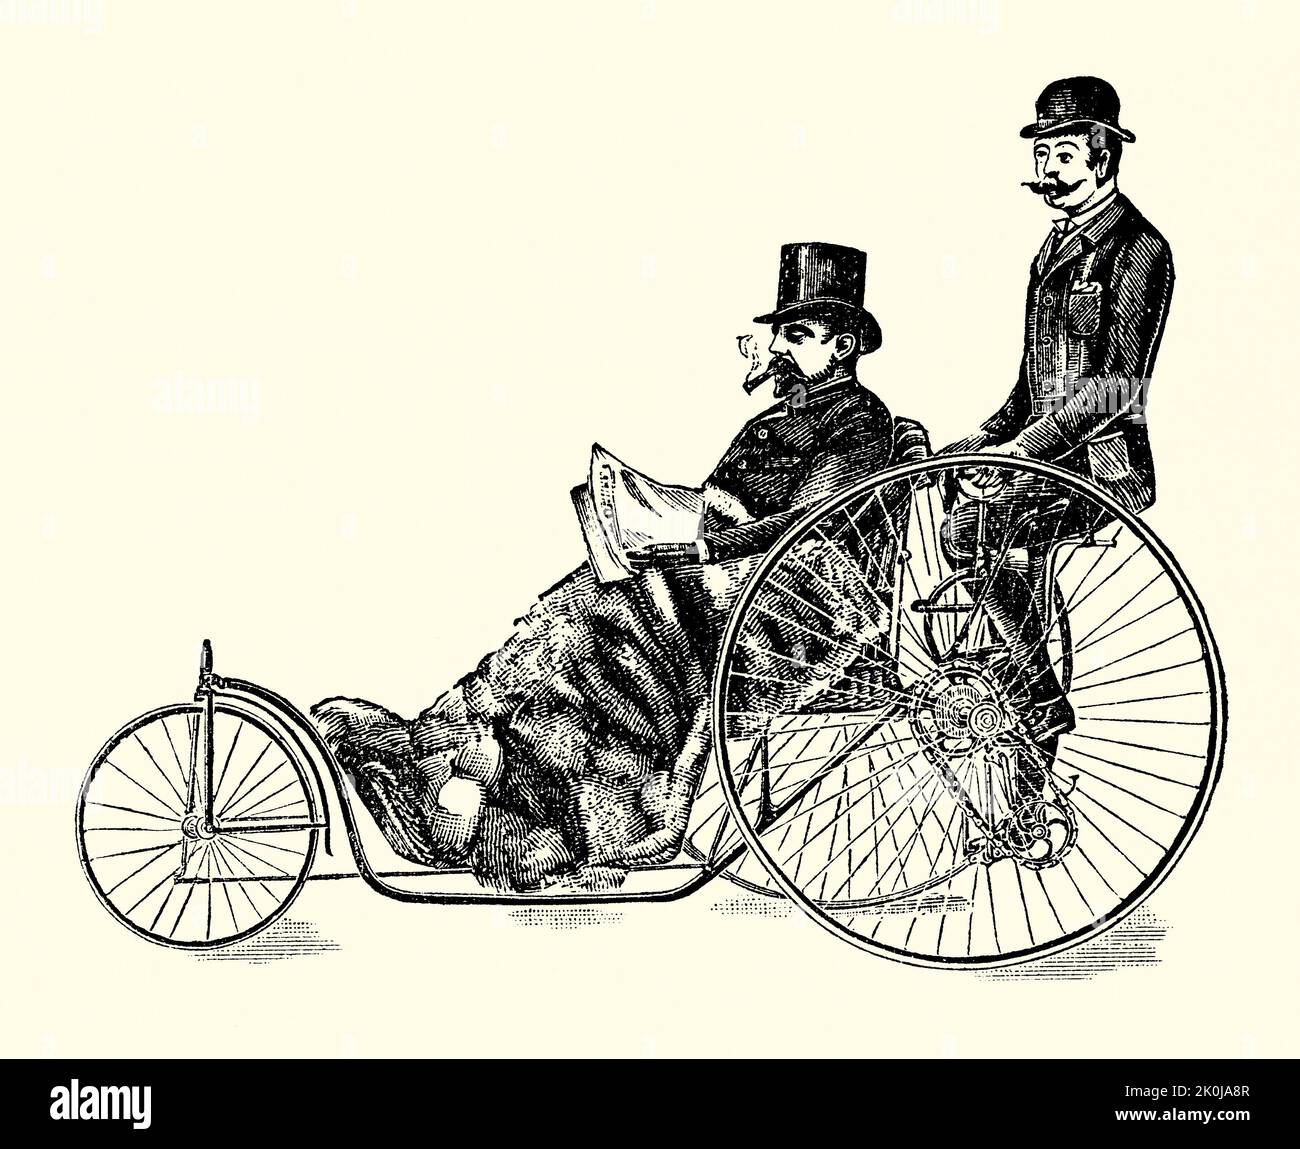 An old Victorian engraving of Starley’s ‘Coventry Chair’. It is from a book of 1890. Starley and Sutton Co of Meteor Works, Coventry, Warwickshire, West Midlands, England, UK was an early pioneer of bicycles. The company was founded in 1878 by John Kemp Starley and William Sutton and made ‘bath chairs’, with provision for pedalling at the rear (as with a tricycle) – these became known as Coventry Chairs. Their ‘Rover’ bicycle design is often recognised as the first ‘modern bicycle’. Stock Photo